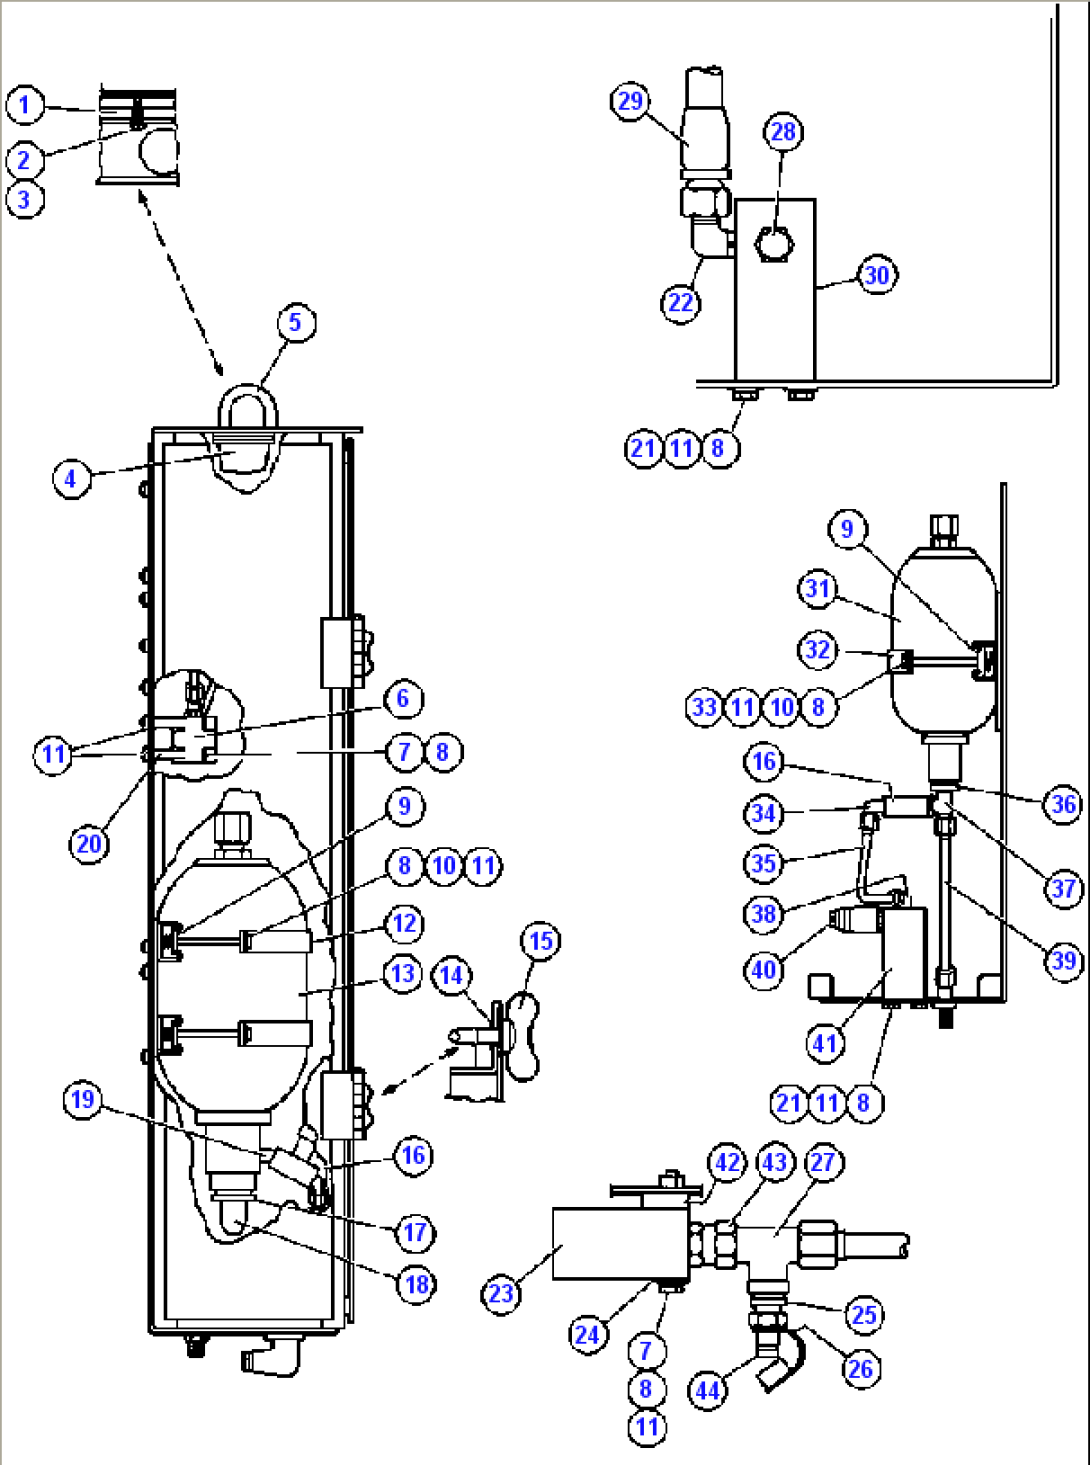 HYDRAULIC CABINET ASSEMBLY - 2